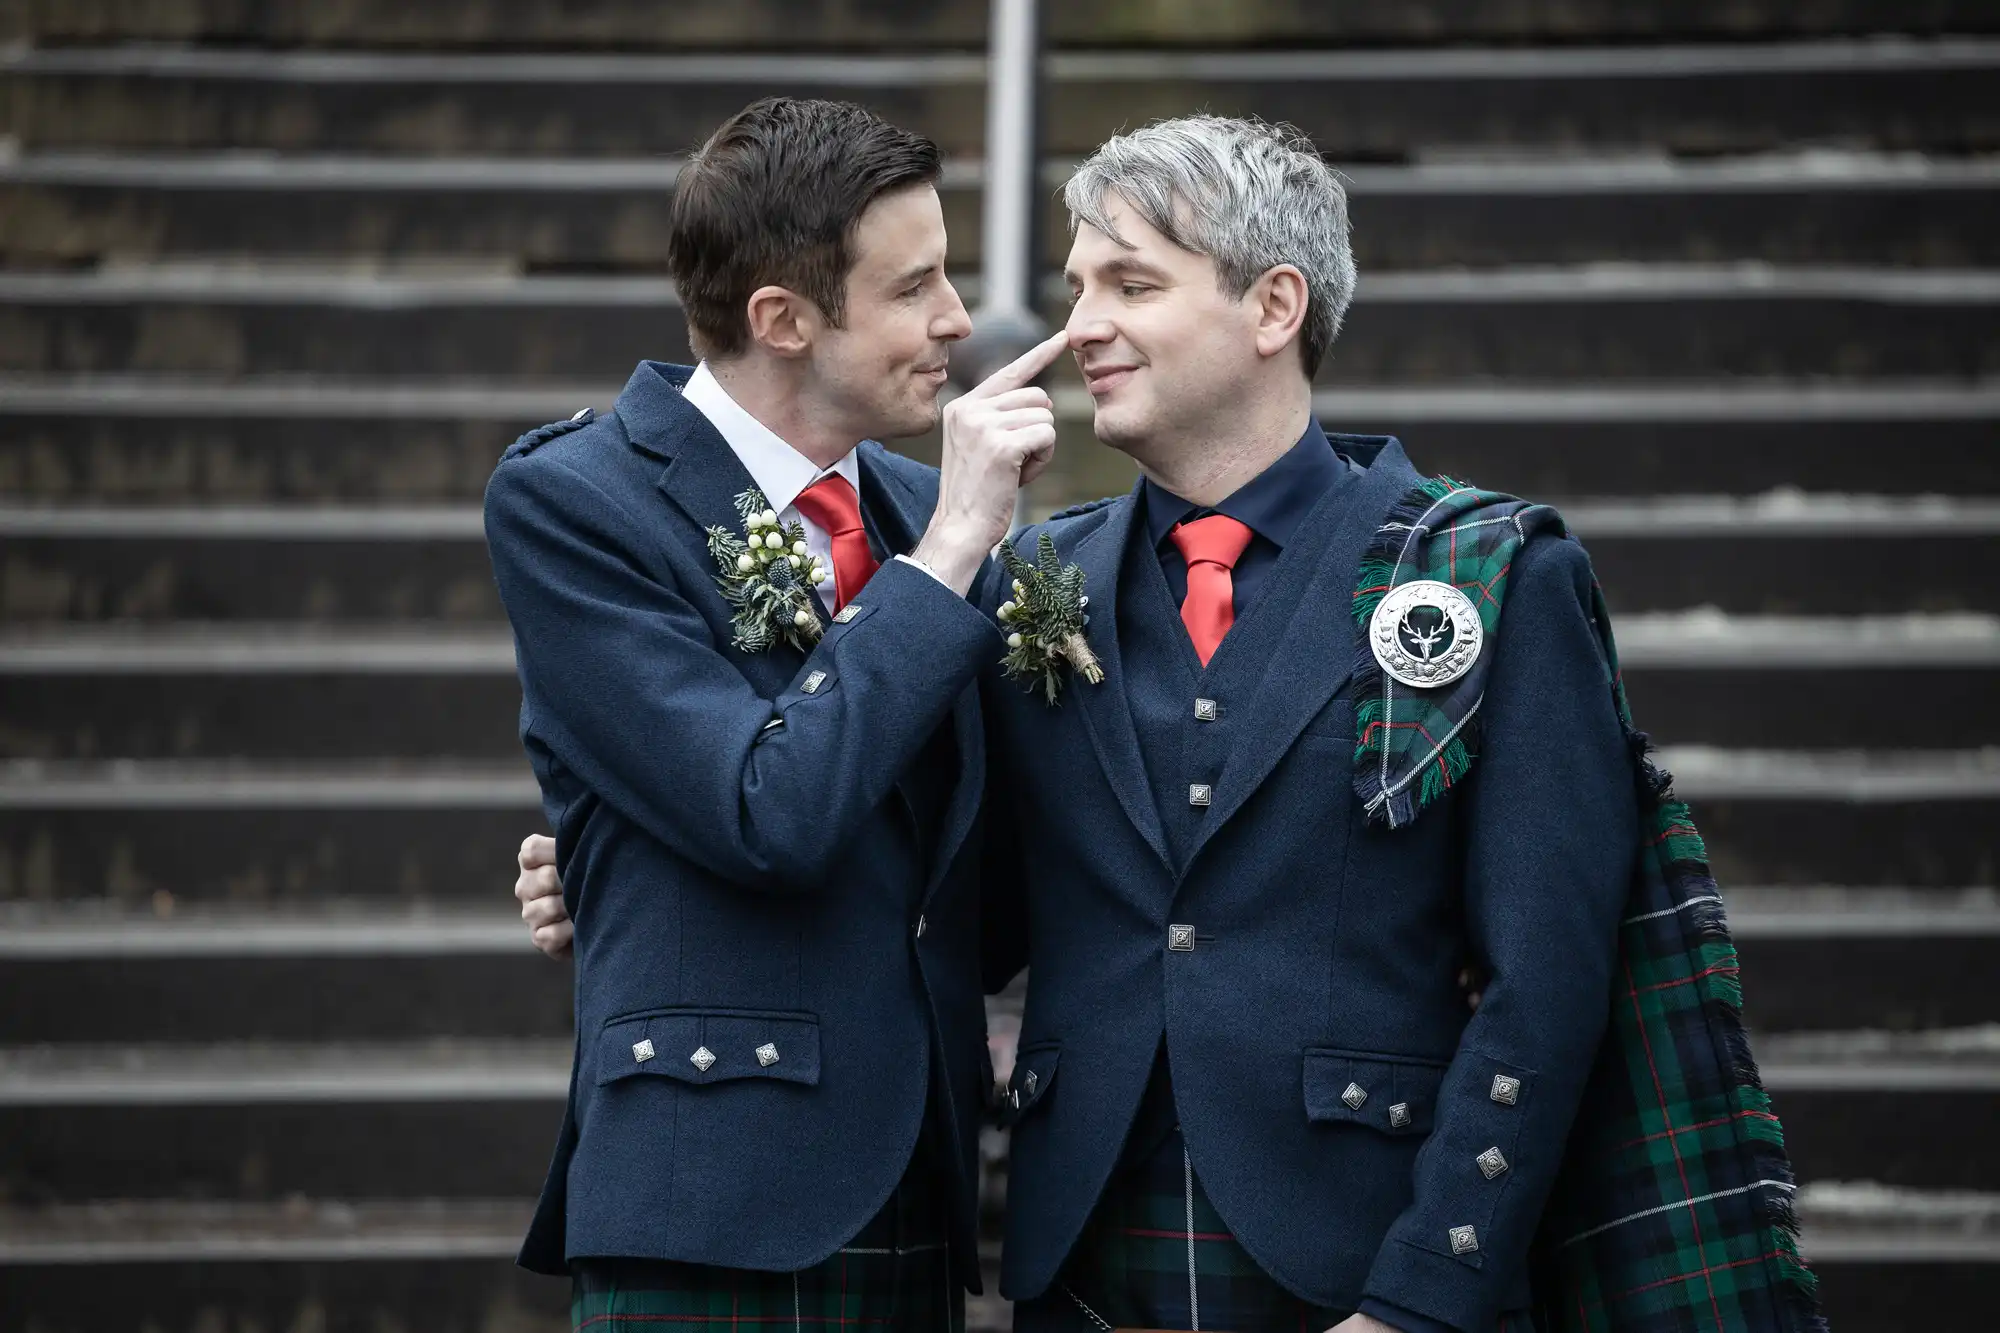 Two men in matching formal attire, including kilts and red ties, stand before steps. One man gestures affectionately to the other, who wears a tartan sash over his shoulder. Both are smiling.